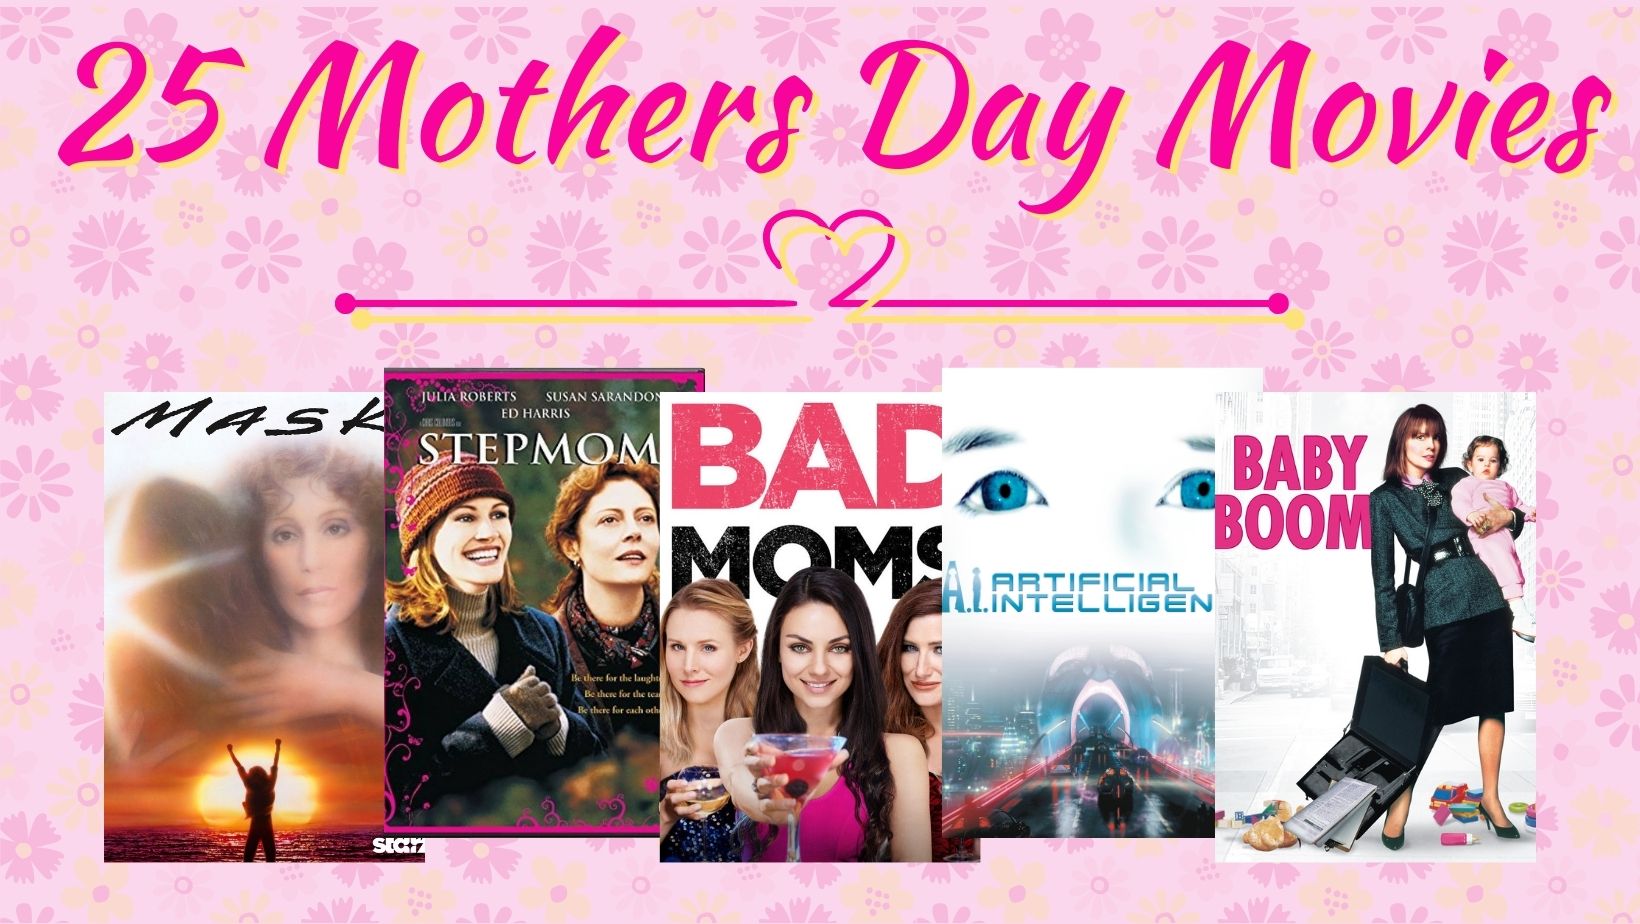 A Mothers Day Movies List: 25 Best Movies to Watch With Mom